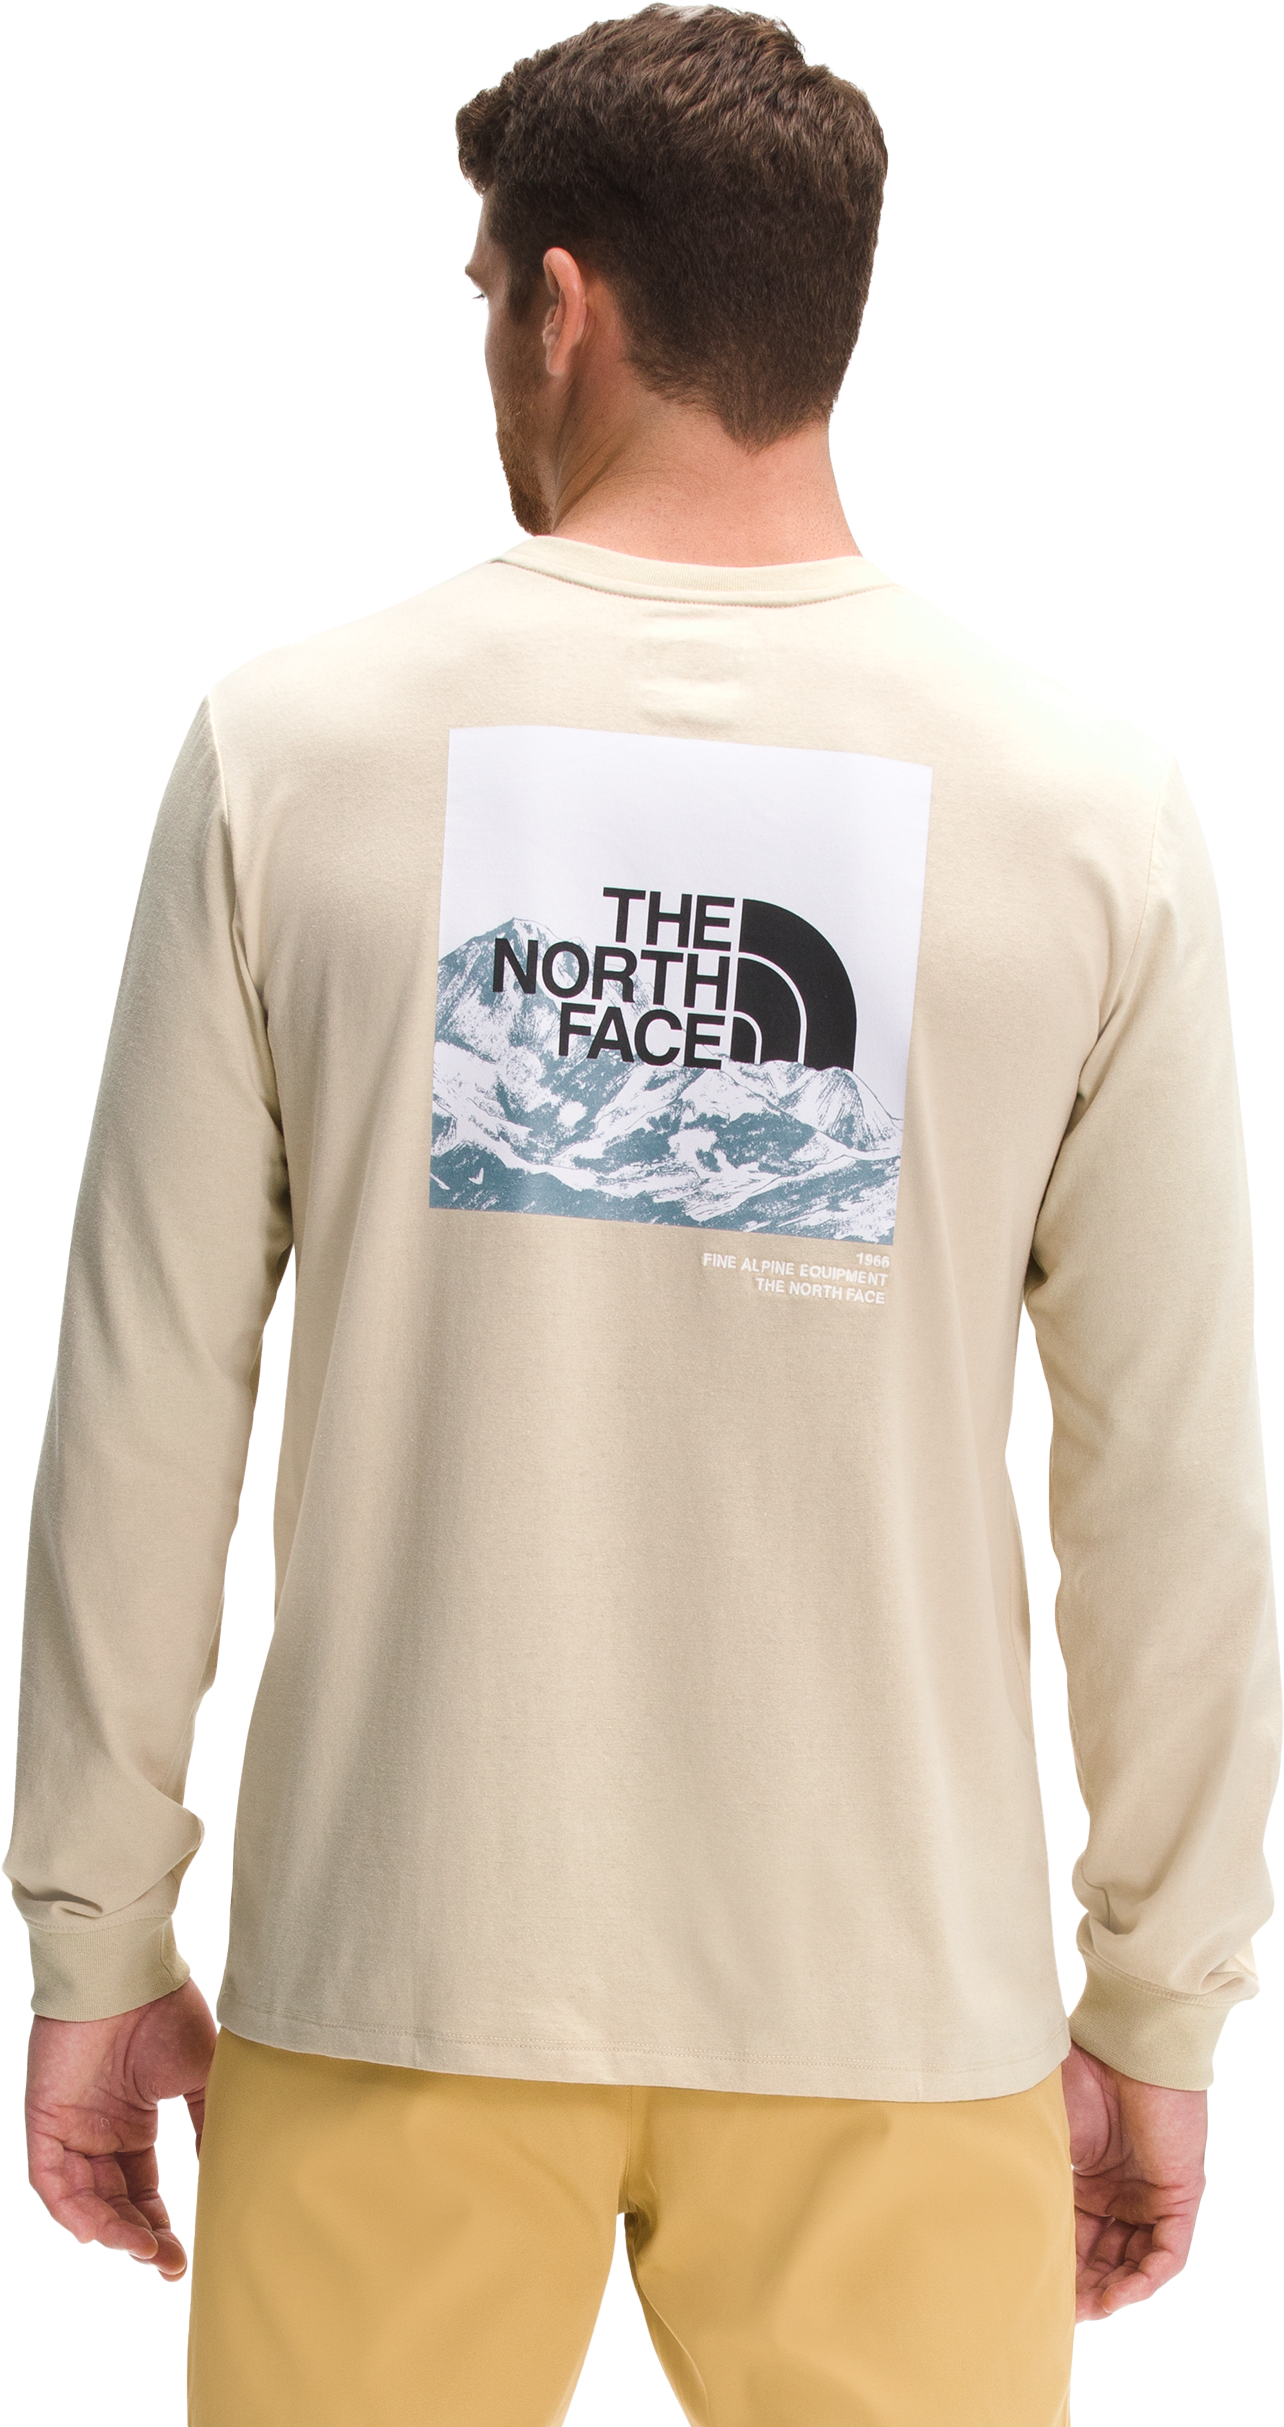 The North Face Logo Play Long-Sleeve T-Shirt for Men - Gravel - L